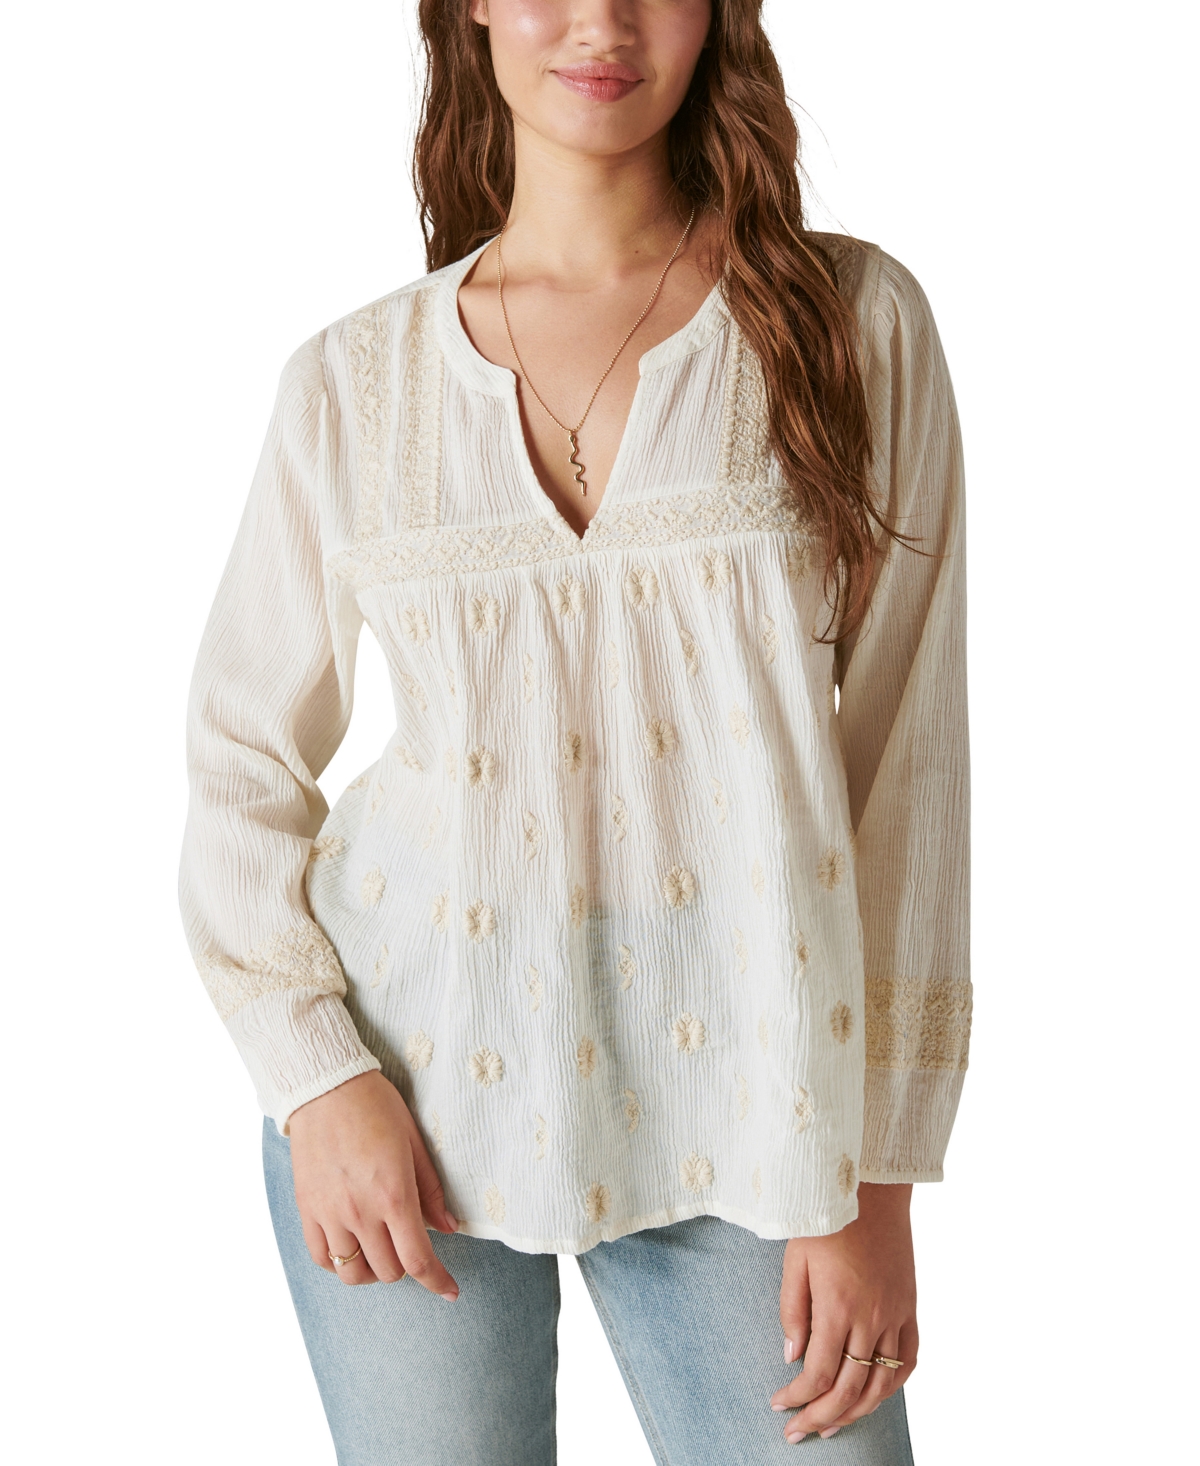 LUCKY BRAND WOMEN'S EMBROIDERED CRINKLED COTTON TOP